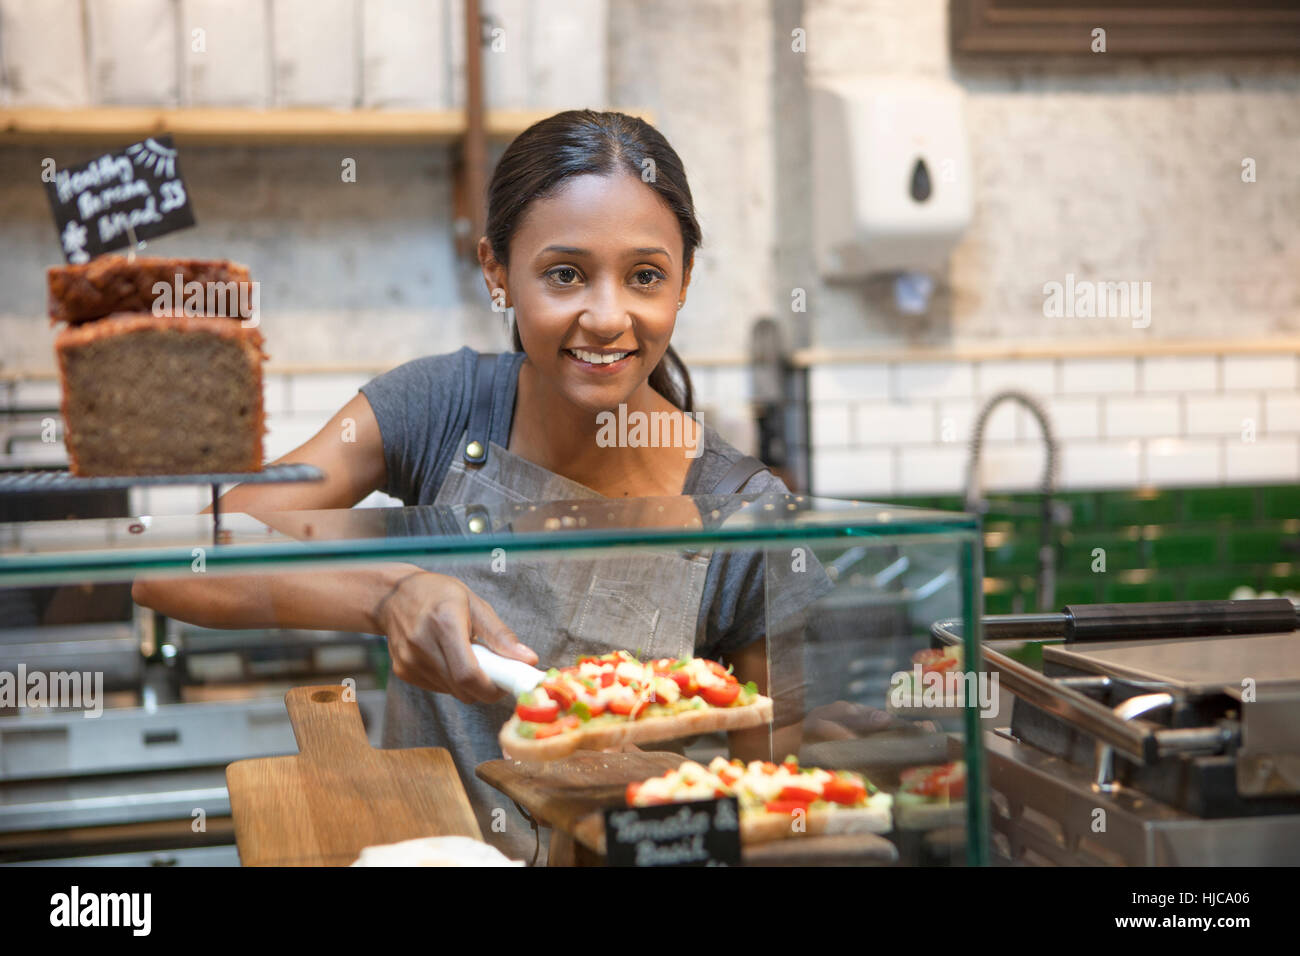 Waitress serving open sandwich from cafe display cabinet Stock Photo